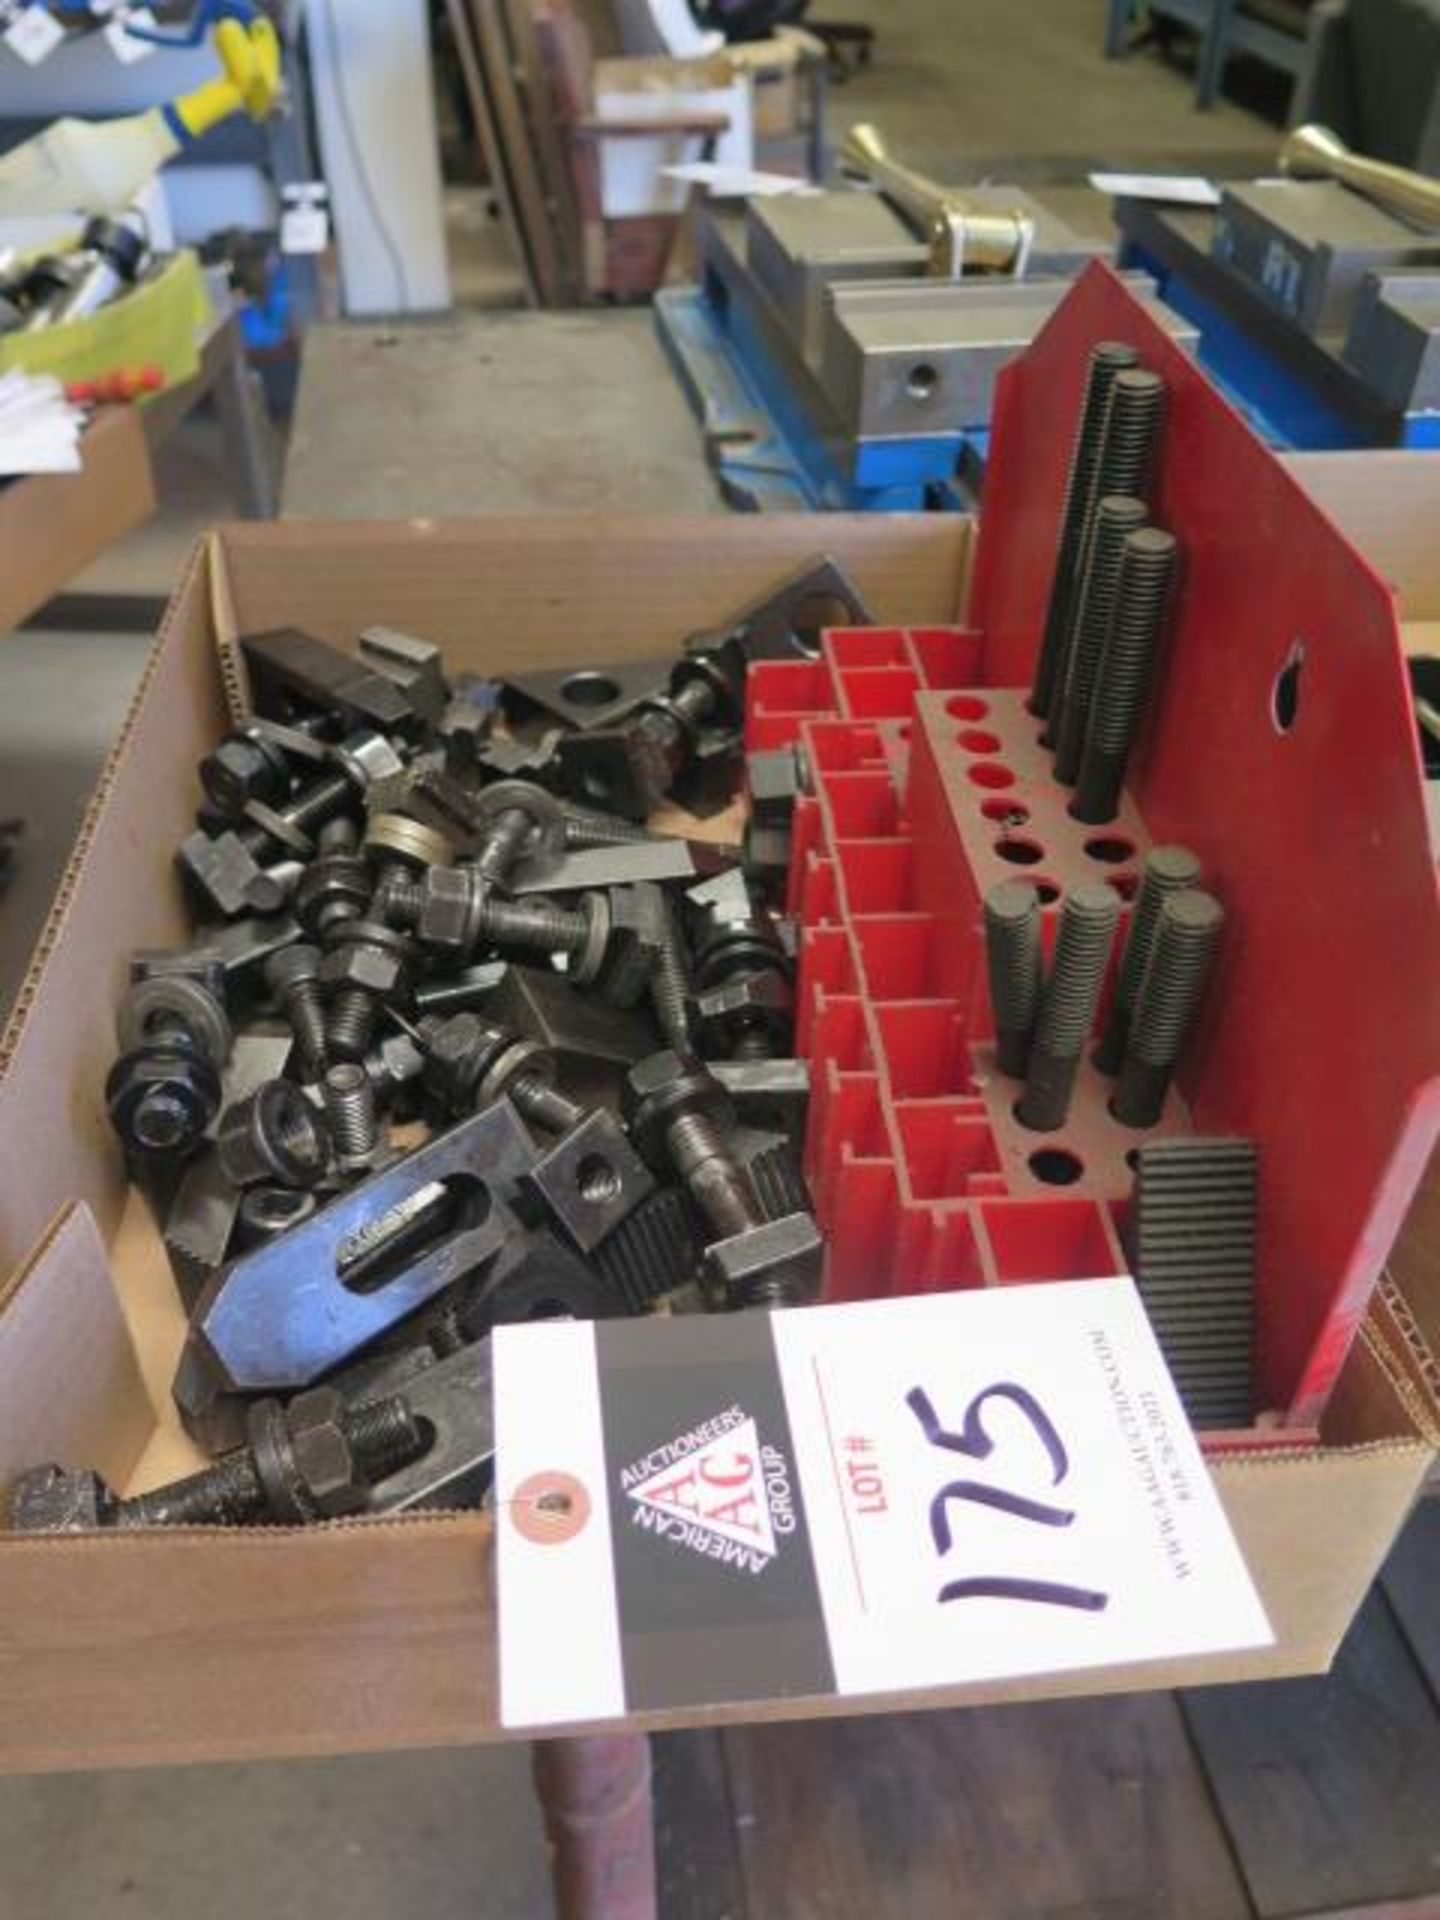 Mill Clamps (SOLD AS-IS - NO WARRANTY)